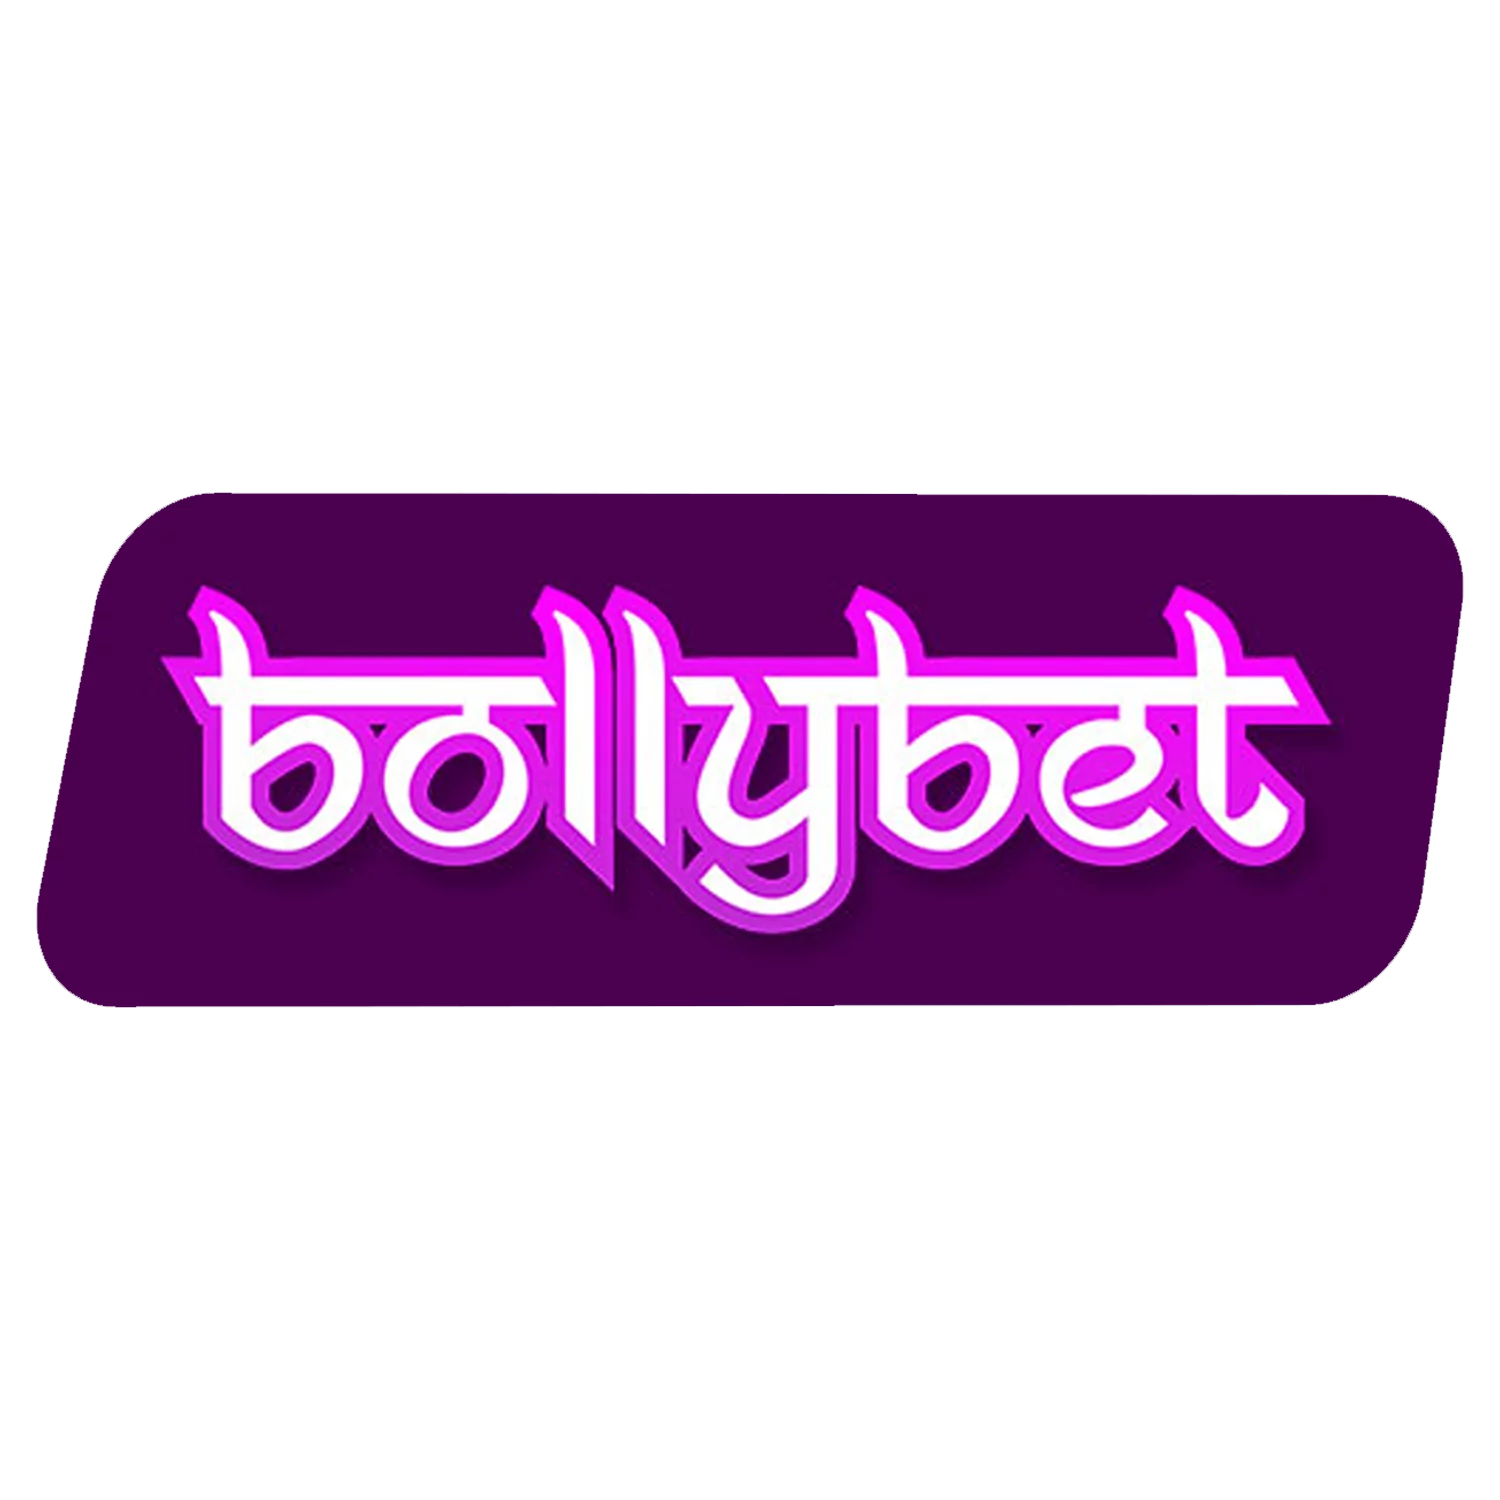 Learn how to sign up and bet on cricket on Bollybet.